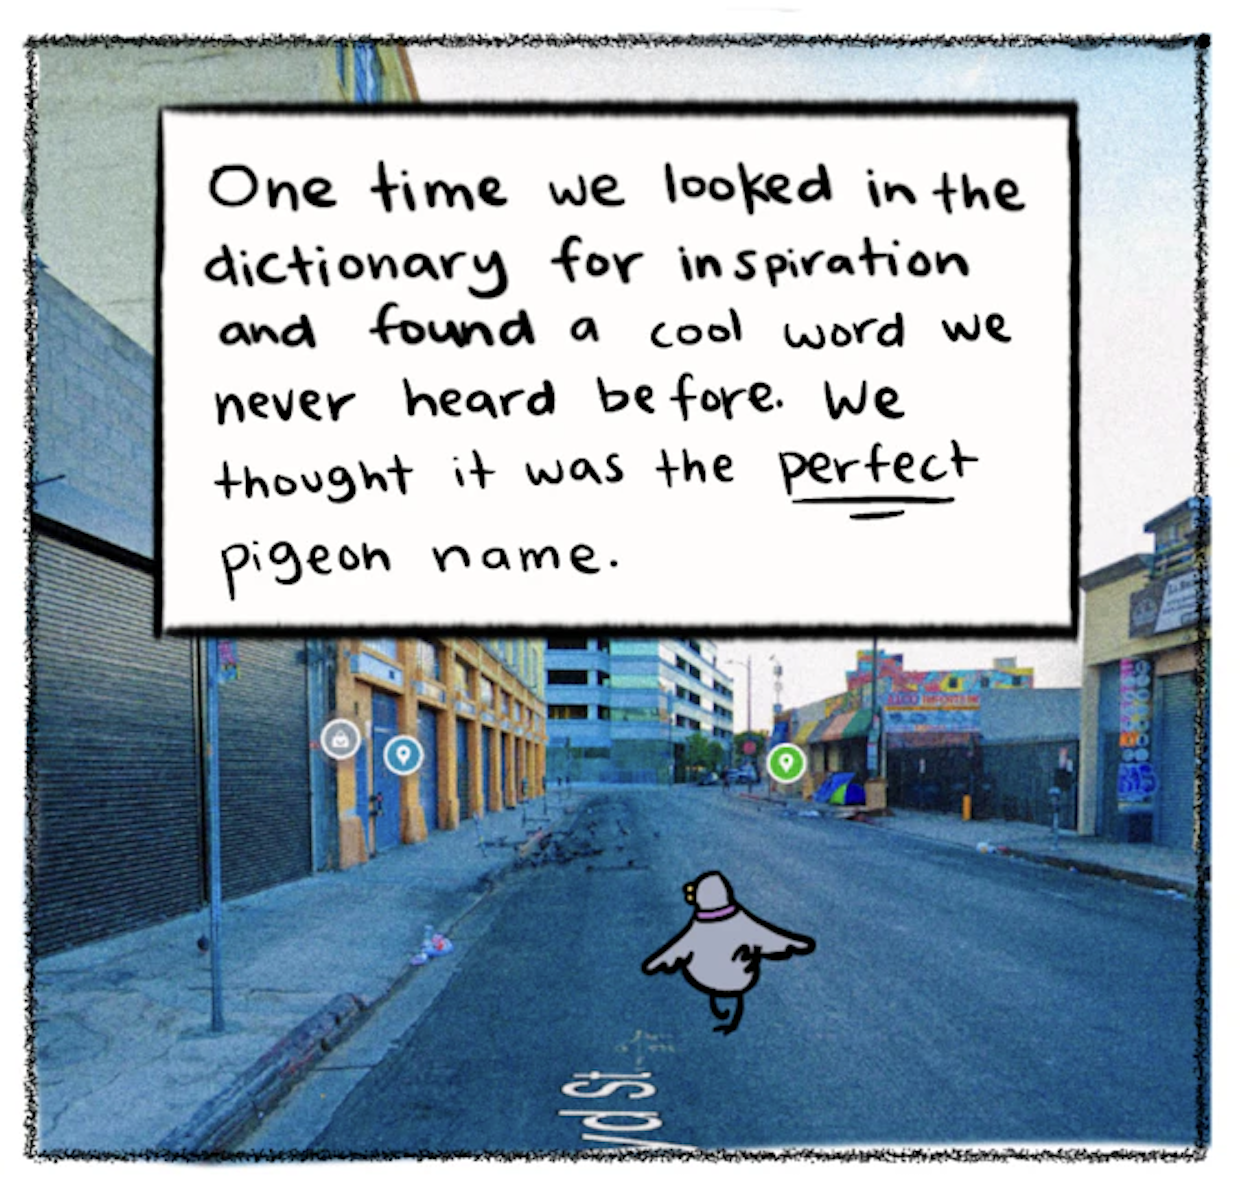 â€œOne time we looked in the dictionary for inspiration and found a cool word we never heard before. We thought it was the PERFECT pigeon name.â€ The cartoon pigeon is walking down the street away from the reader. 